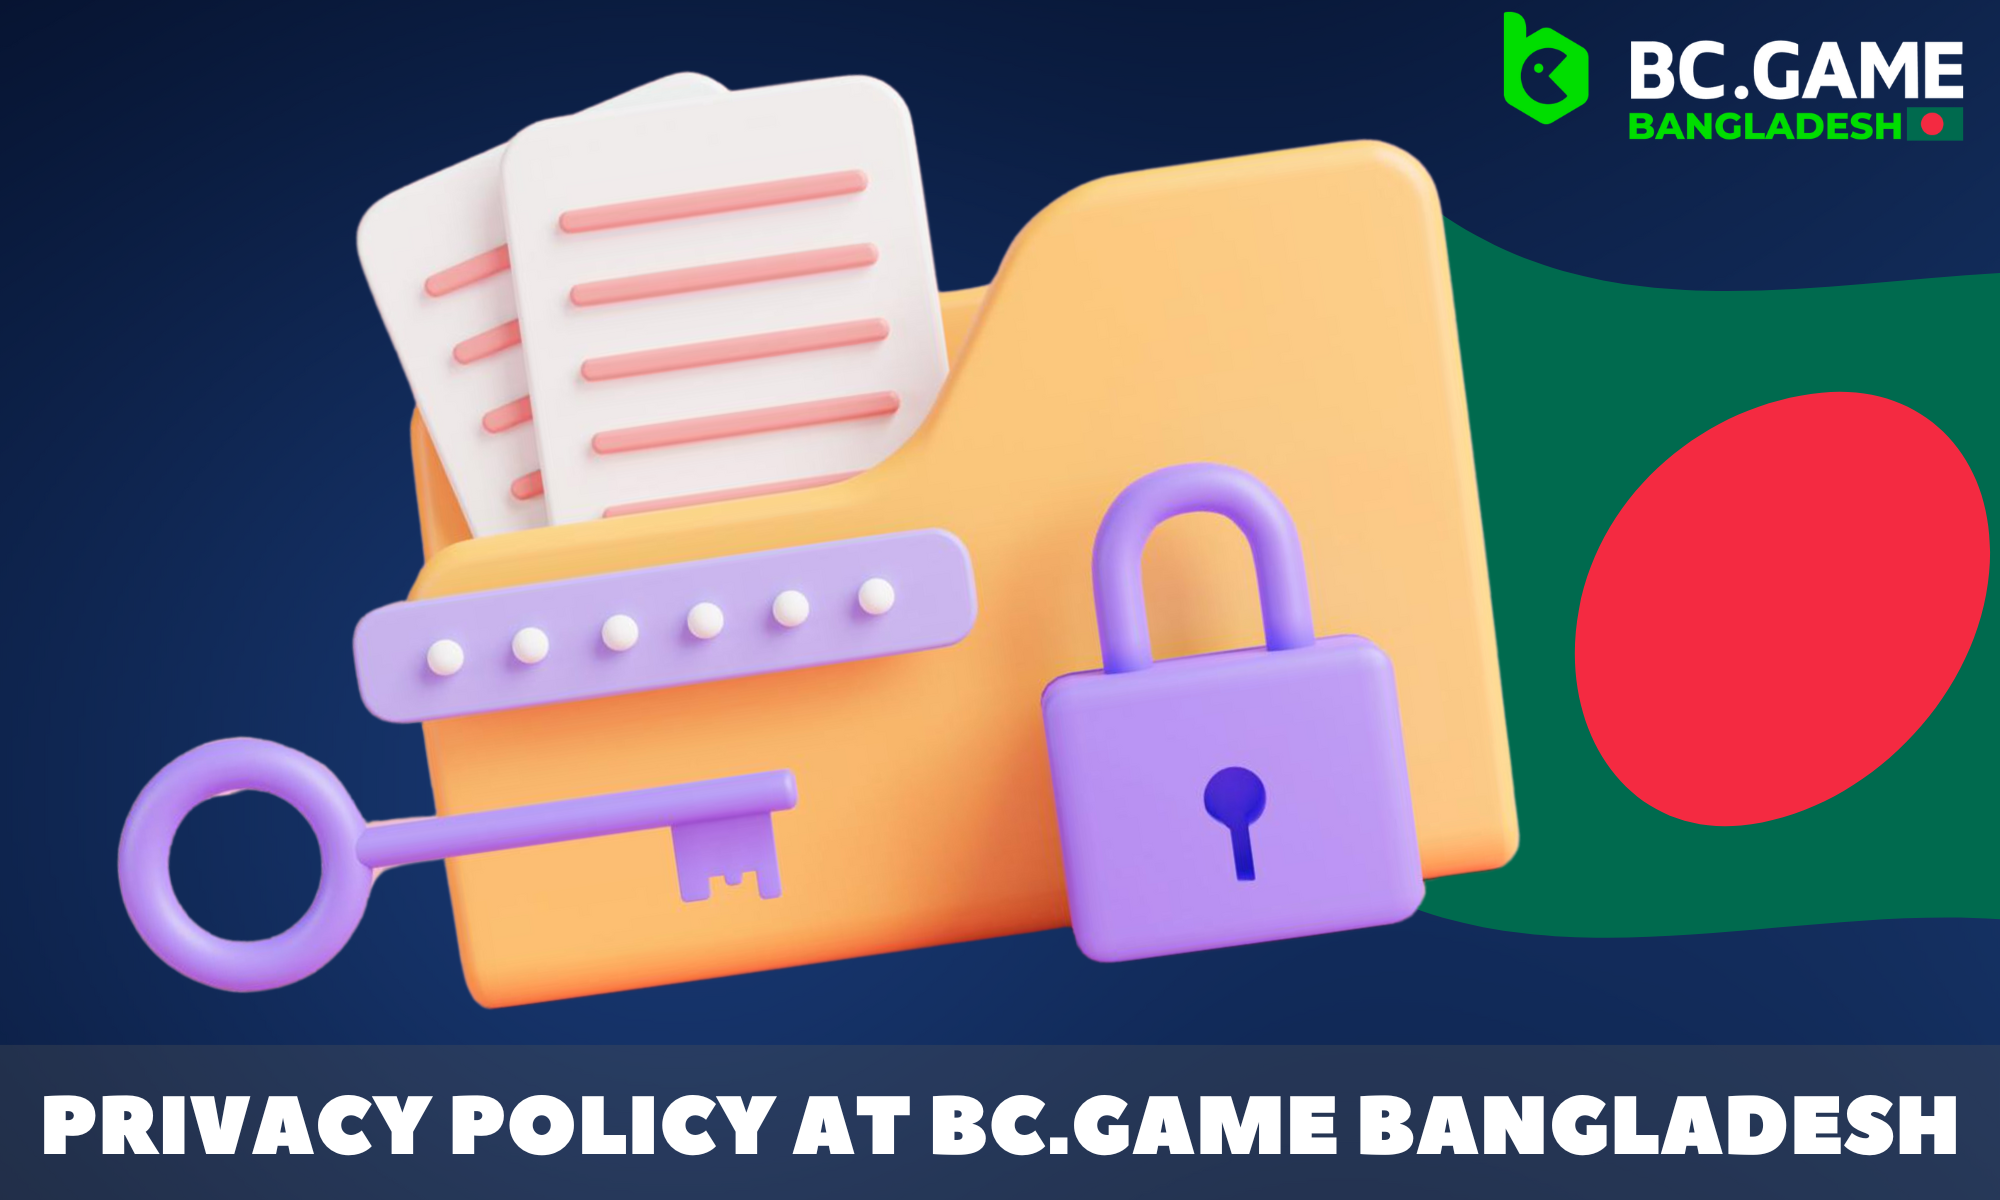 BC.GAME Bangladesh has a specially developed privacy policy